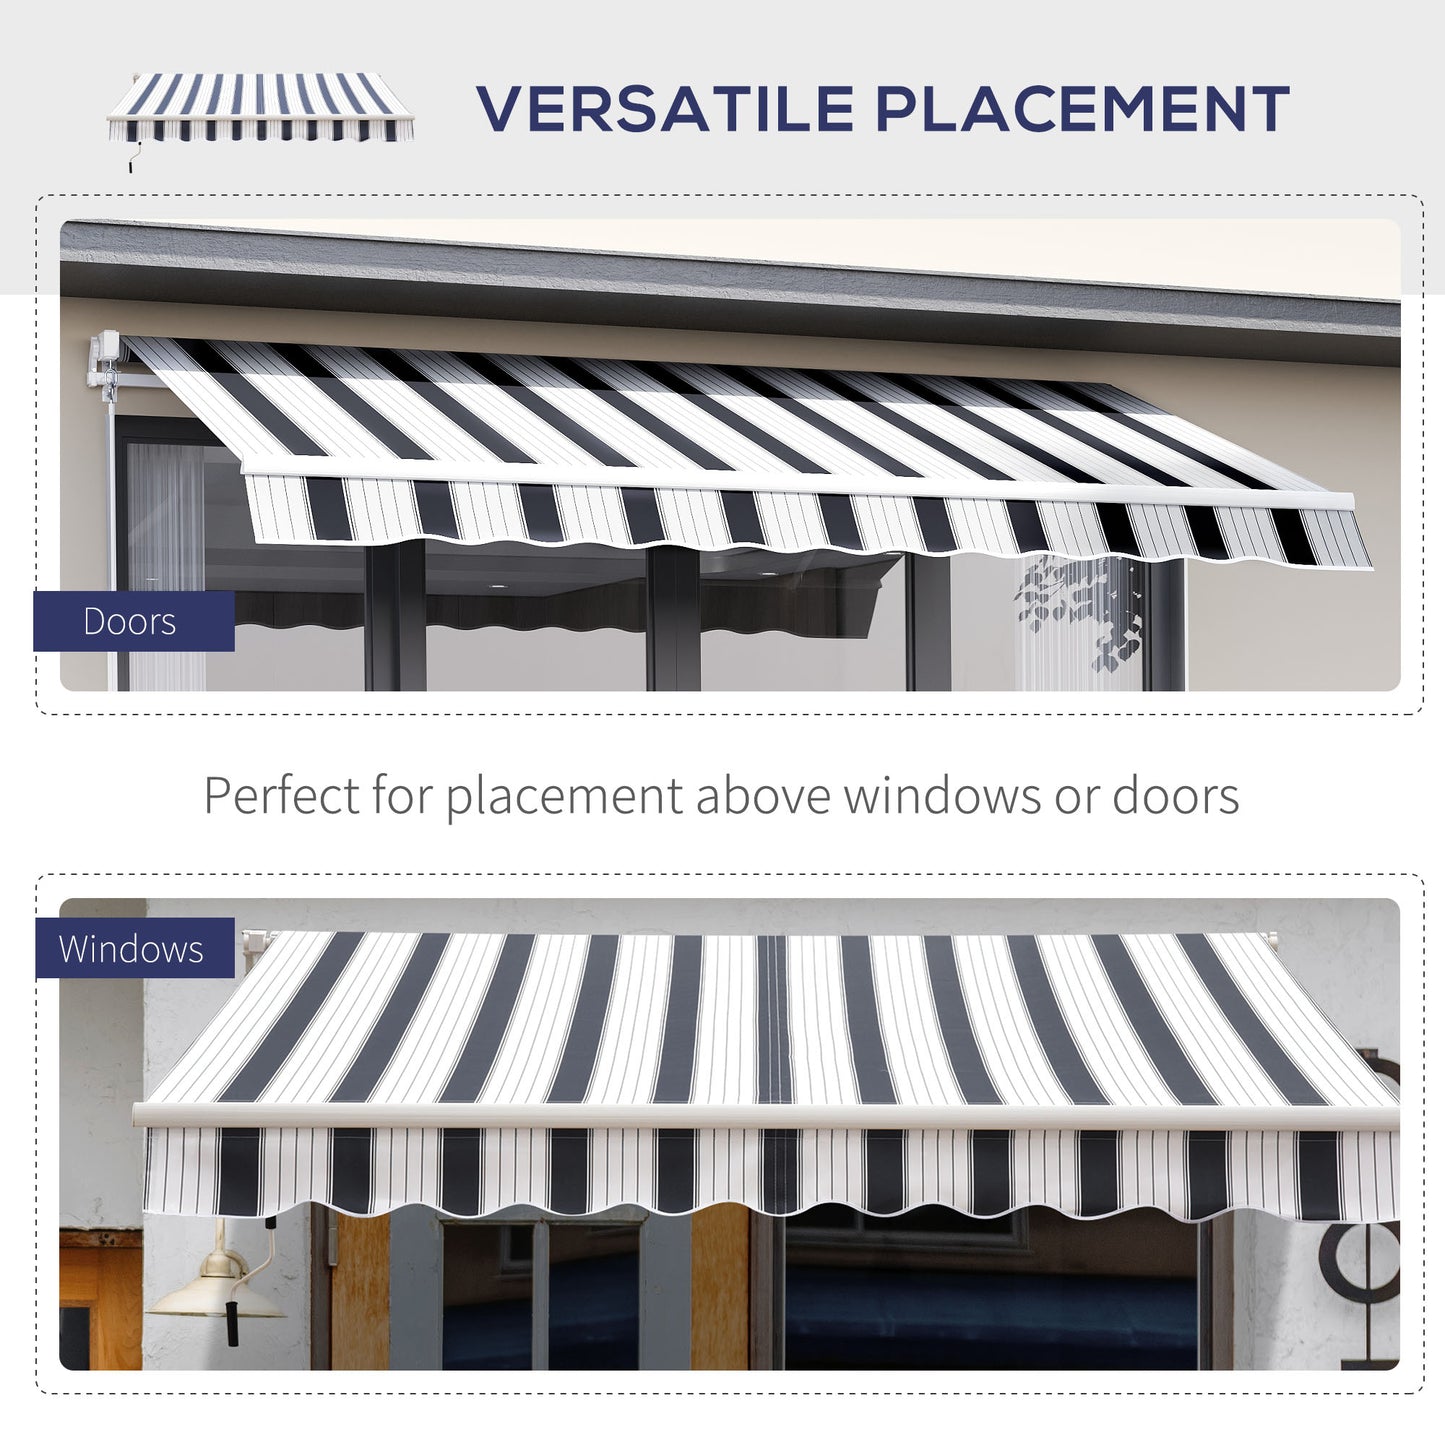 Outsunny 2.5m x 2m Garden Patio Manual Awning Canopy Sun Shade Shelter Retractable with Winding Handle Blue White